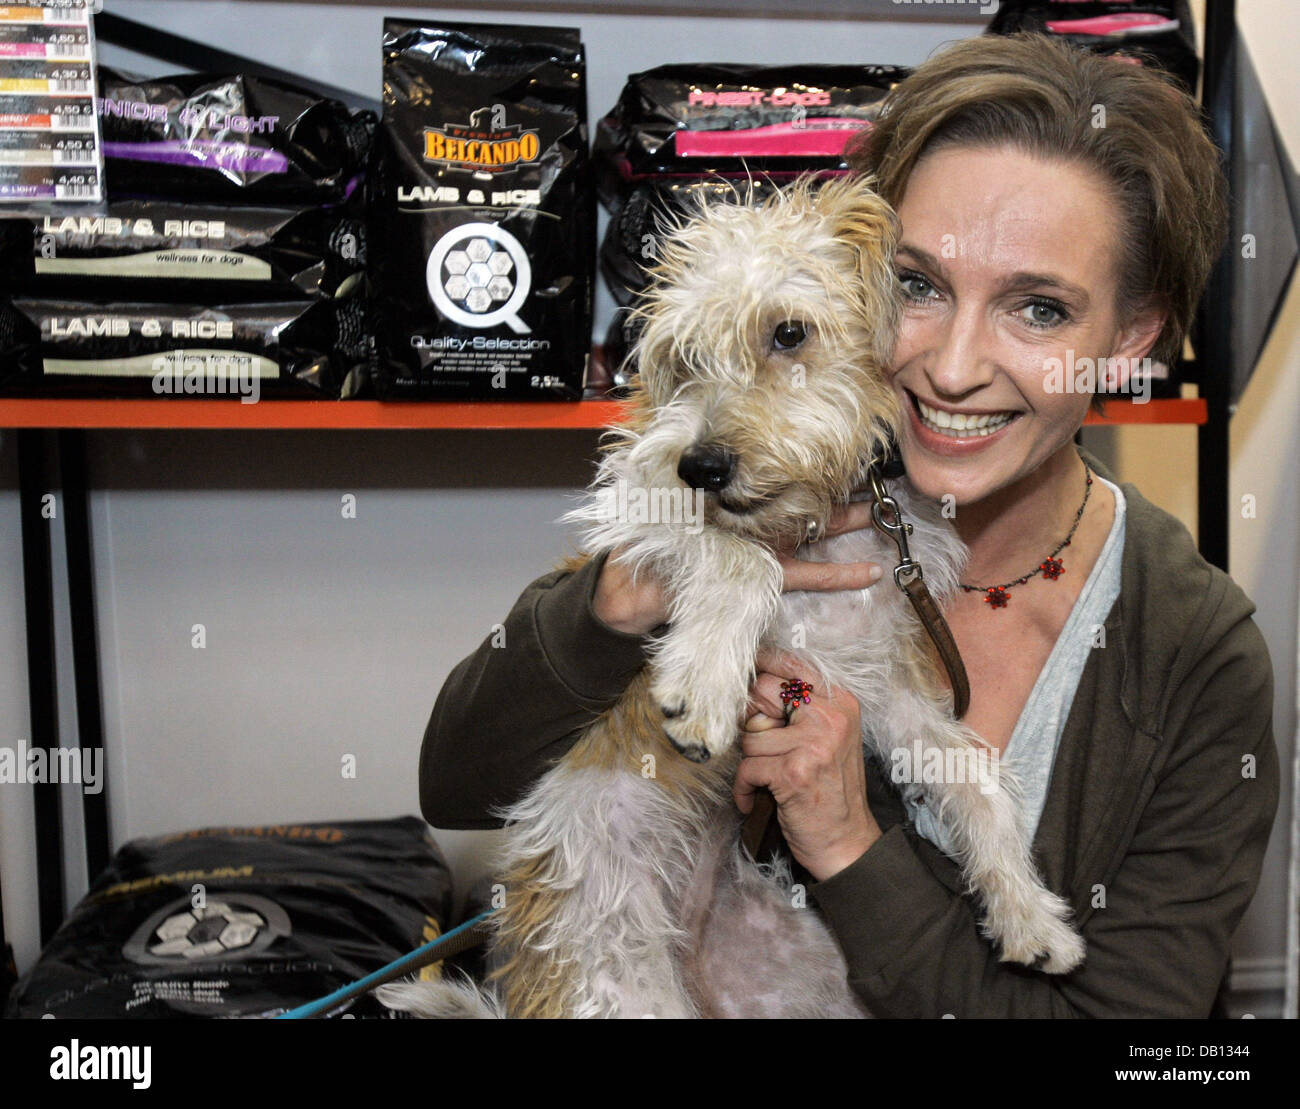 Actress Conny Niedrig poses with a dog at the opening of her dog parlour in Essen, Germany, 28 October 2007. With the opening  of the shop a long entertained youth dream came true for Niedrig, who stars in the SAT1 serial ?Niedrig und Kuhnt?. Photo: Joerg Carstensen Stock Photo